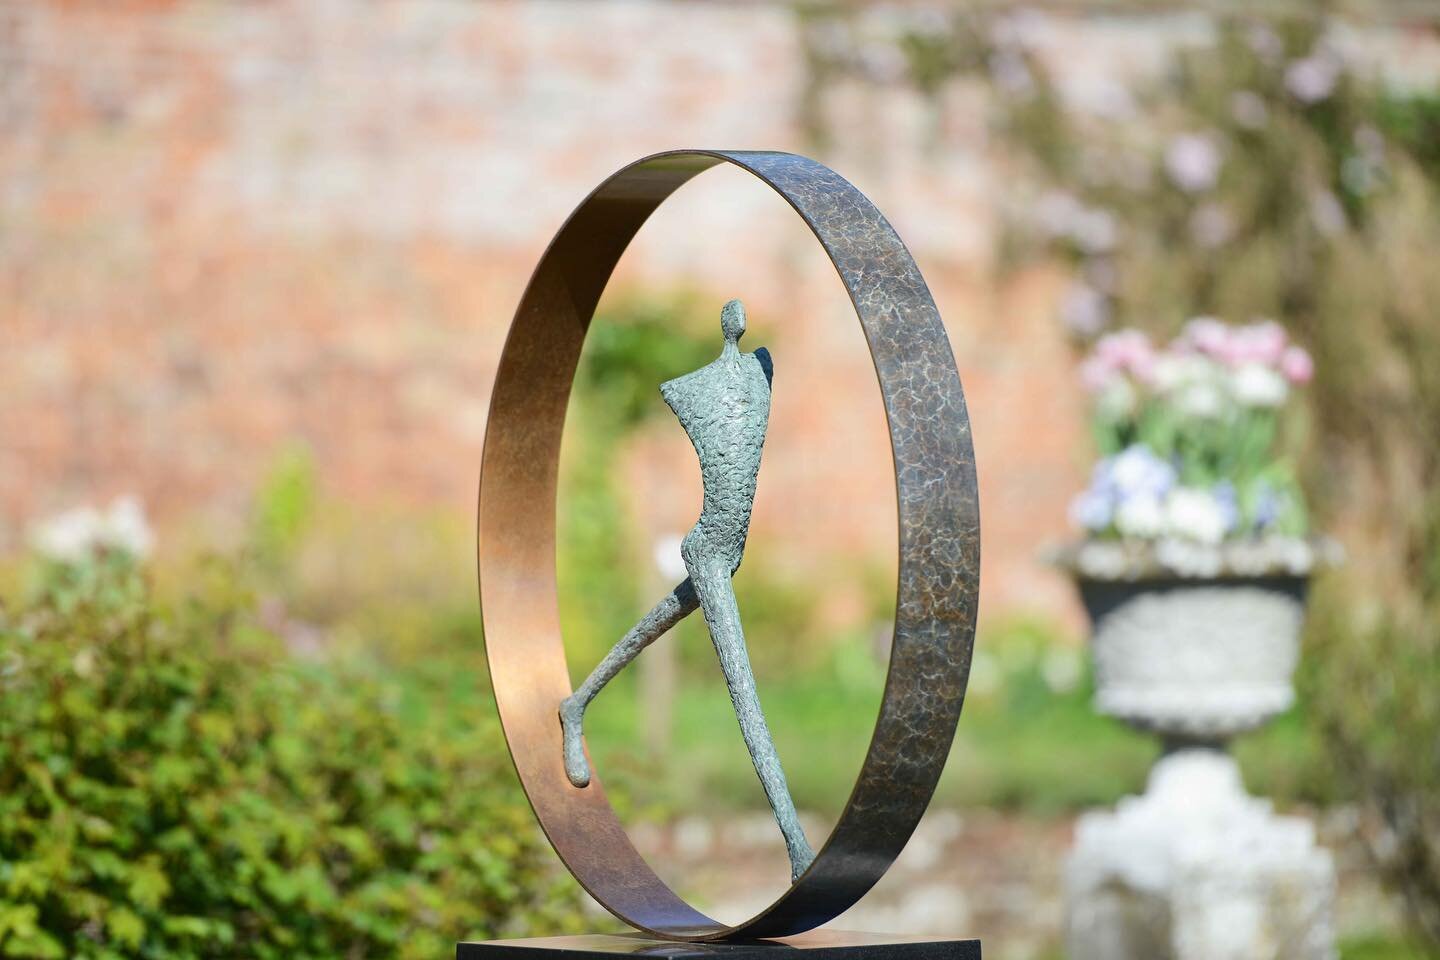 Faster ready for Spring - aren&rsquo;t we all! 
#spring #bronzesculpture #gardensculpture #figurativesculpture #sculpture #michaelspeller #sculptor #gardendesign #commission